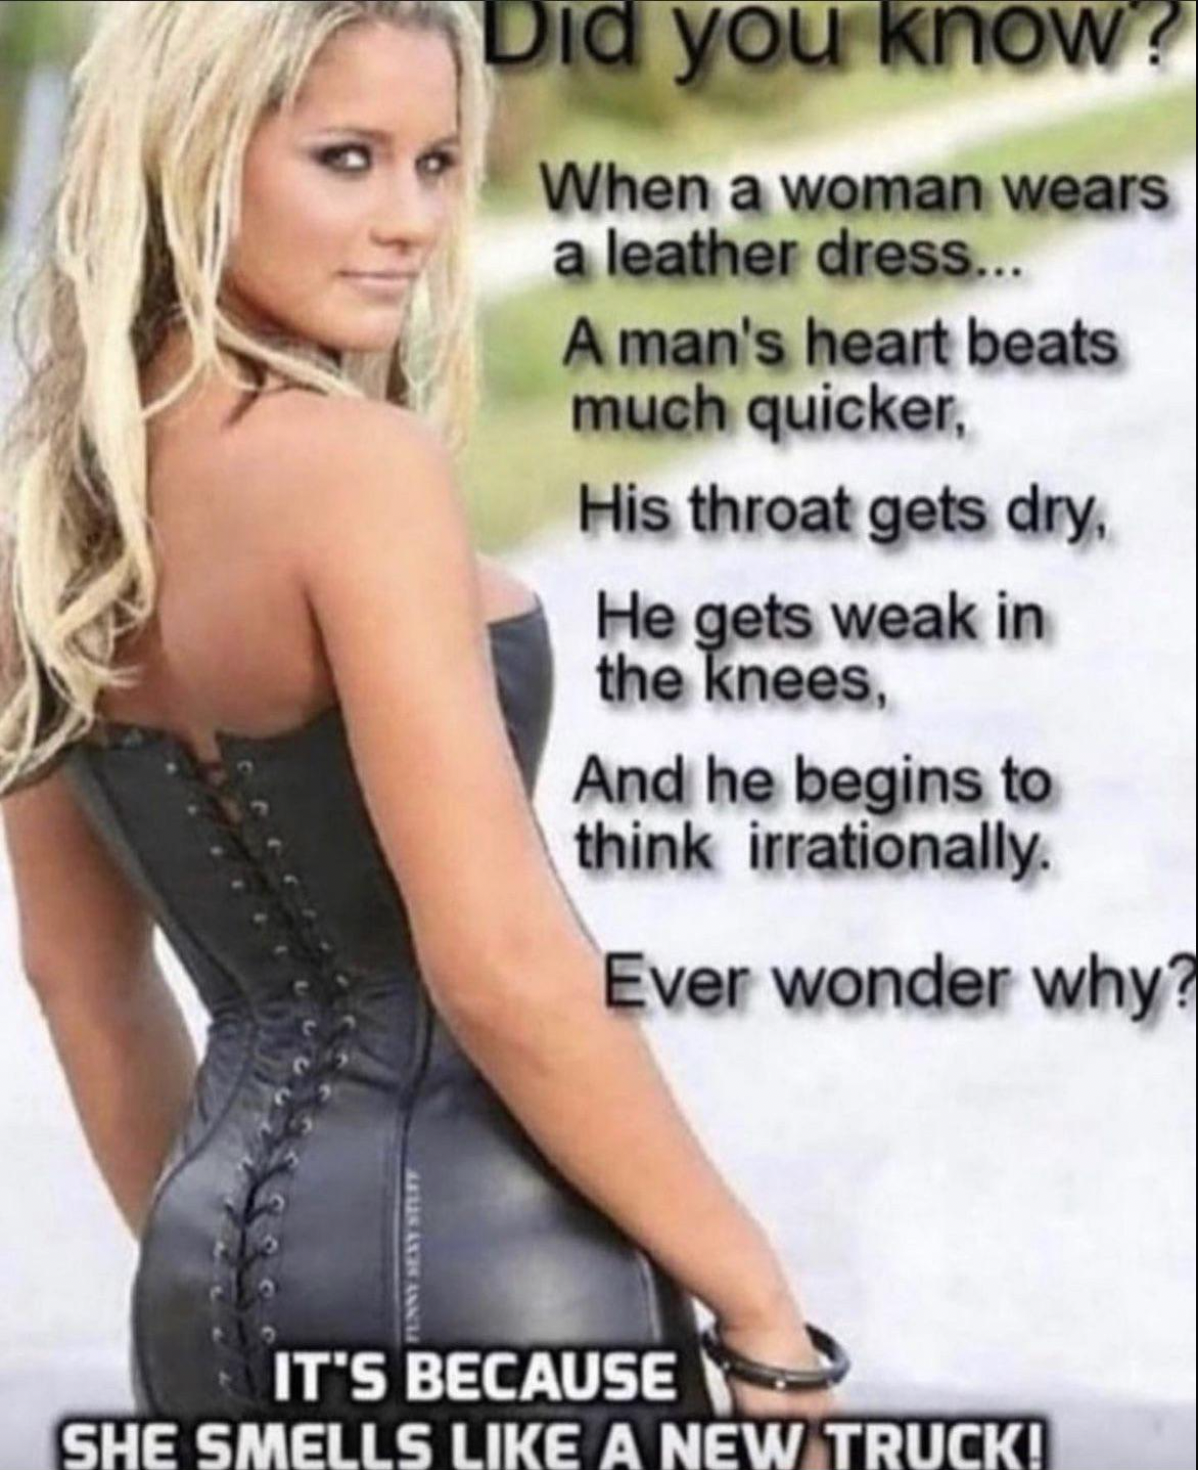 photo caption - Did you know? When a woman wears a leather dress... A man's heart beats much quicker, His throat gets dry. He gets weak in the knees. And he begins to think irrationally. Ever wonder why? It'S Because She Smells A New Truck!